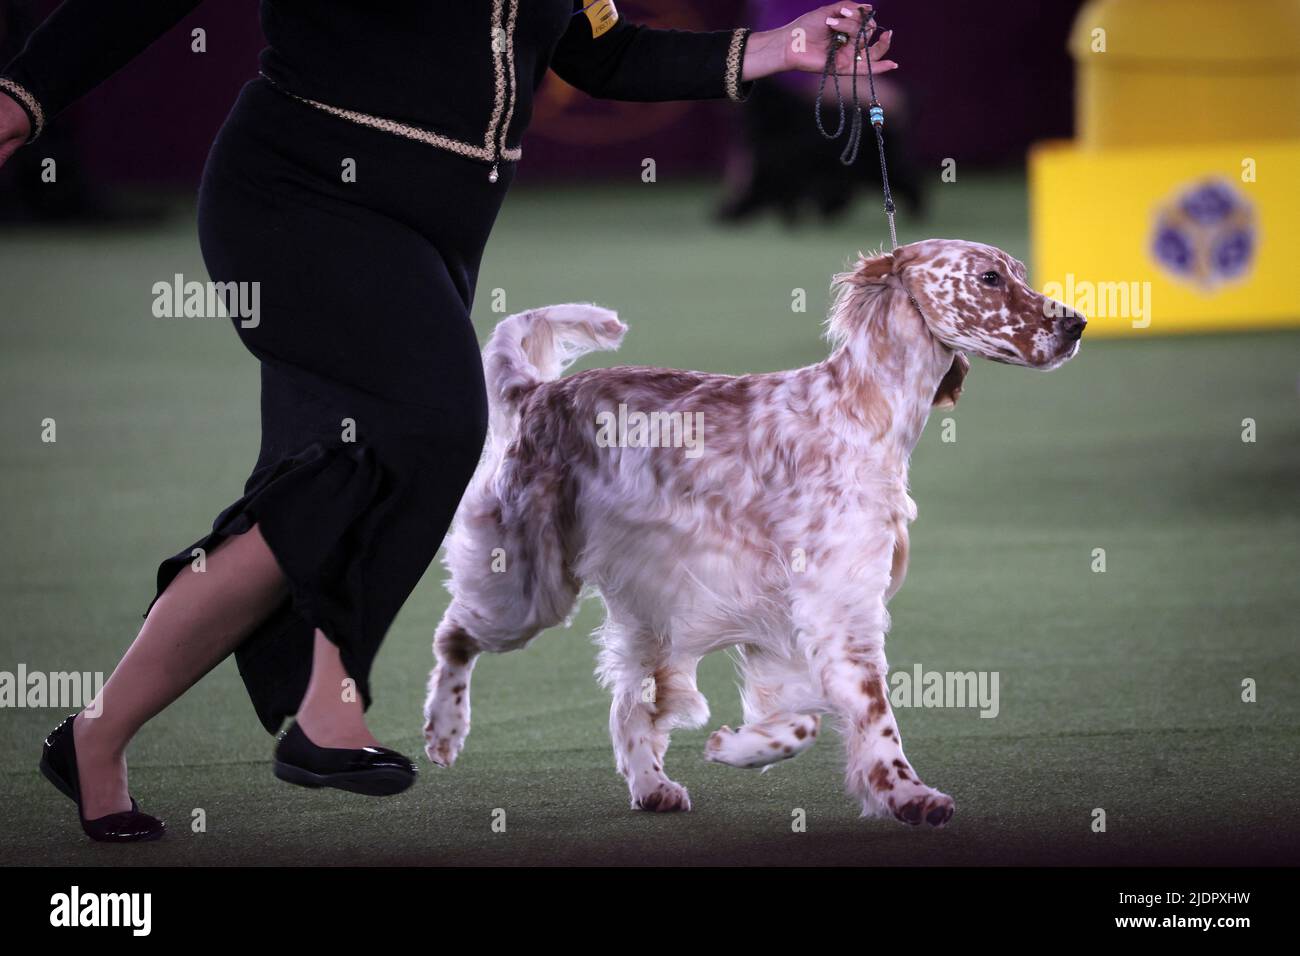 Belle, an English Setter and winner of the Sporting Group, runs in the ring during judging at the 146th Westminster Kennel Club Dog Show at the Lyndhurst Estate in Tarrytown, New York, U.S., June 22, 2022. REUTERS/Mike Segar Stock Photo